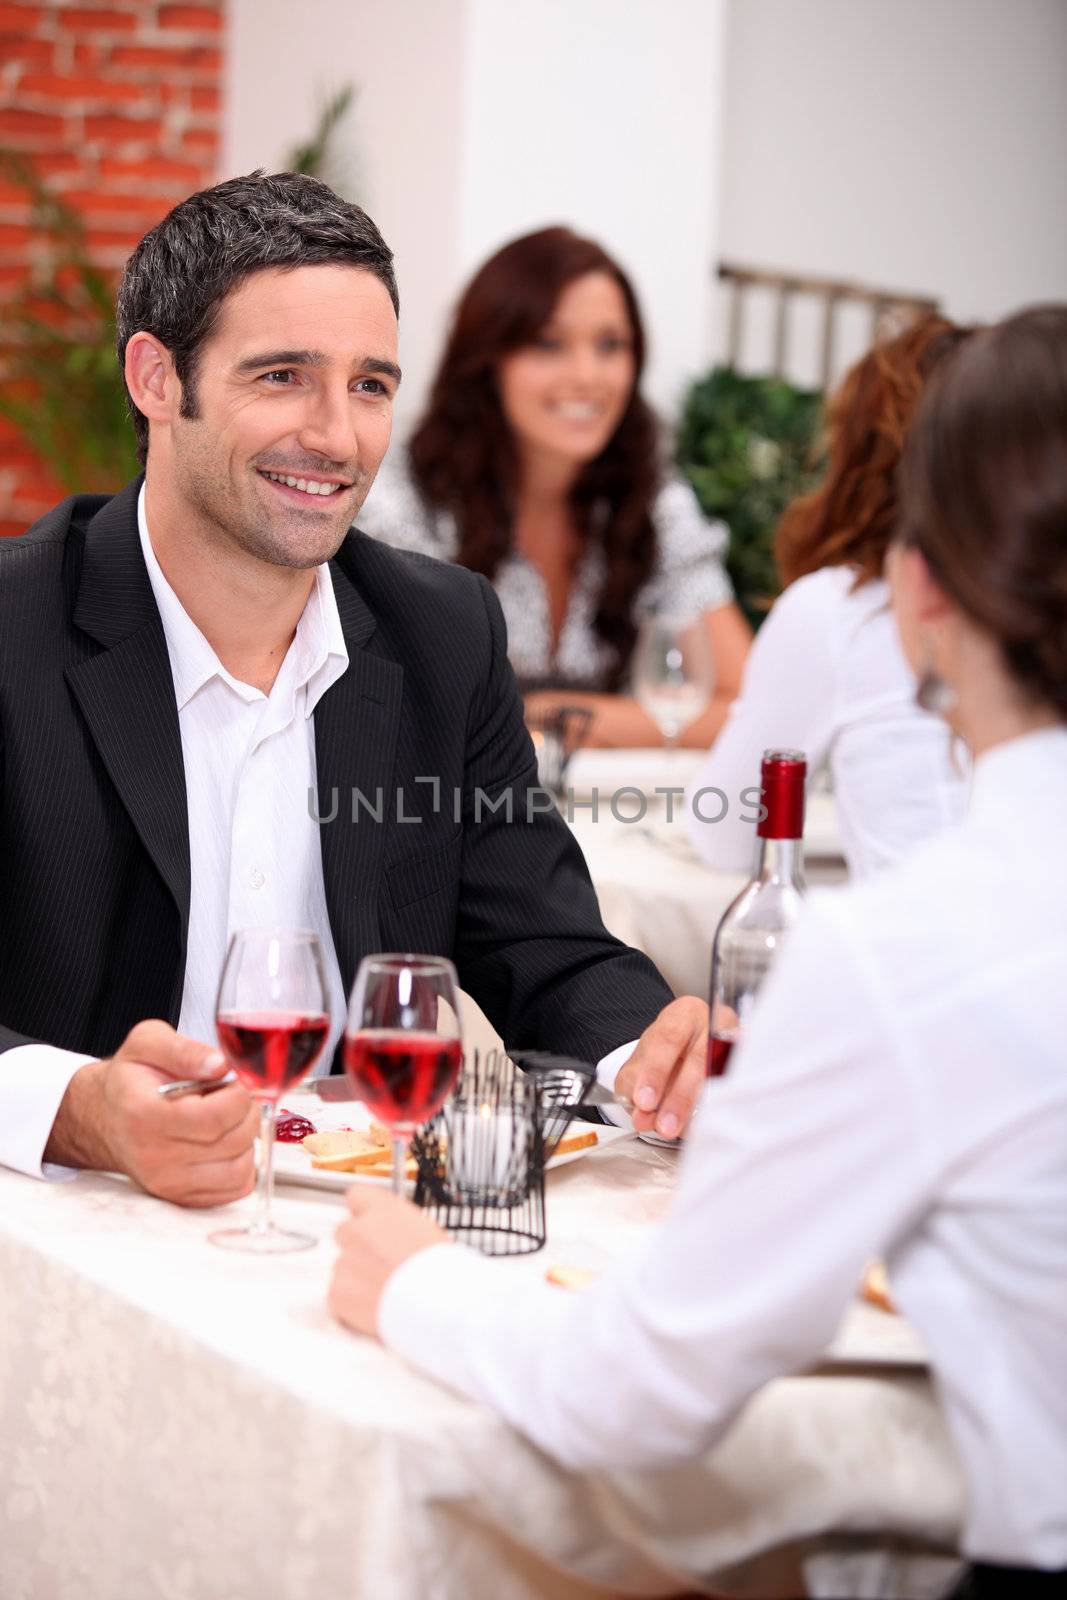 Couple enjoying a romantic meal together by phovoir